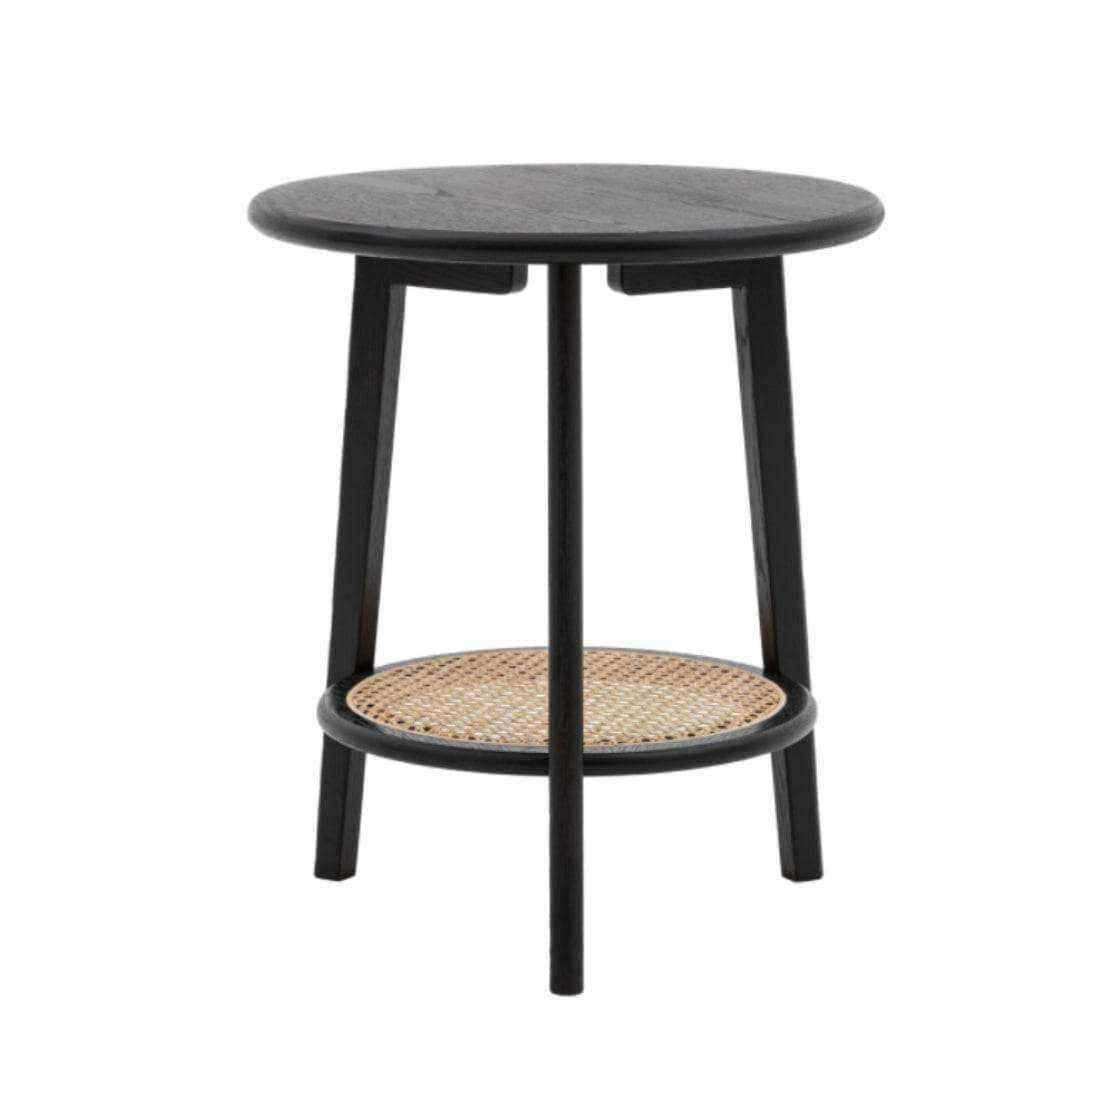 Black Art Deco Inspired Round Side Table - The Farthing